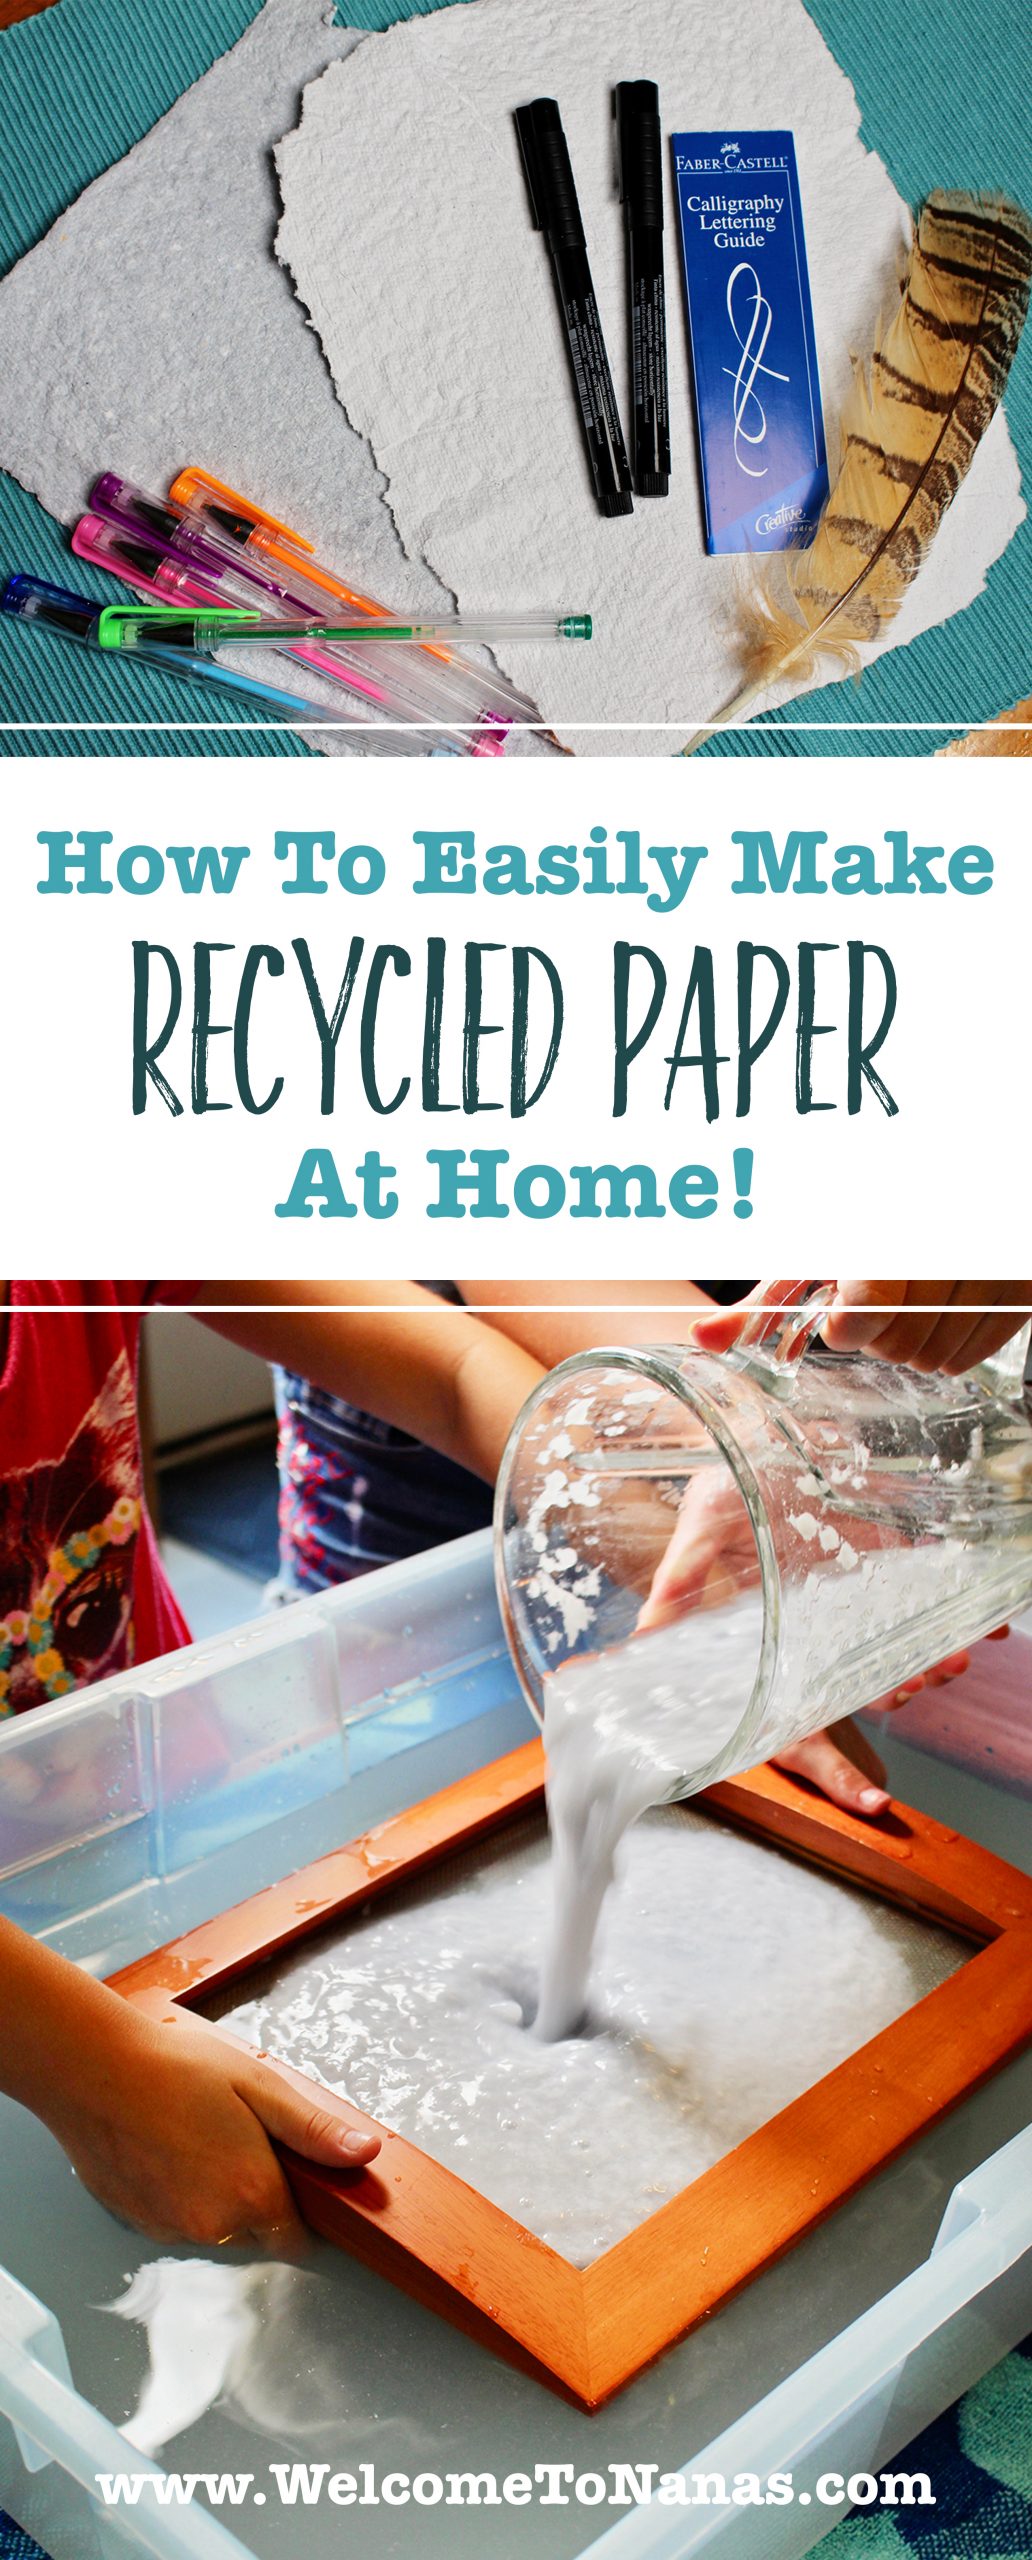 Creative Kit to Make Recycled Paper 